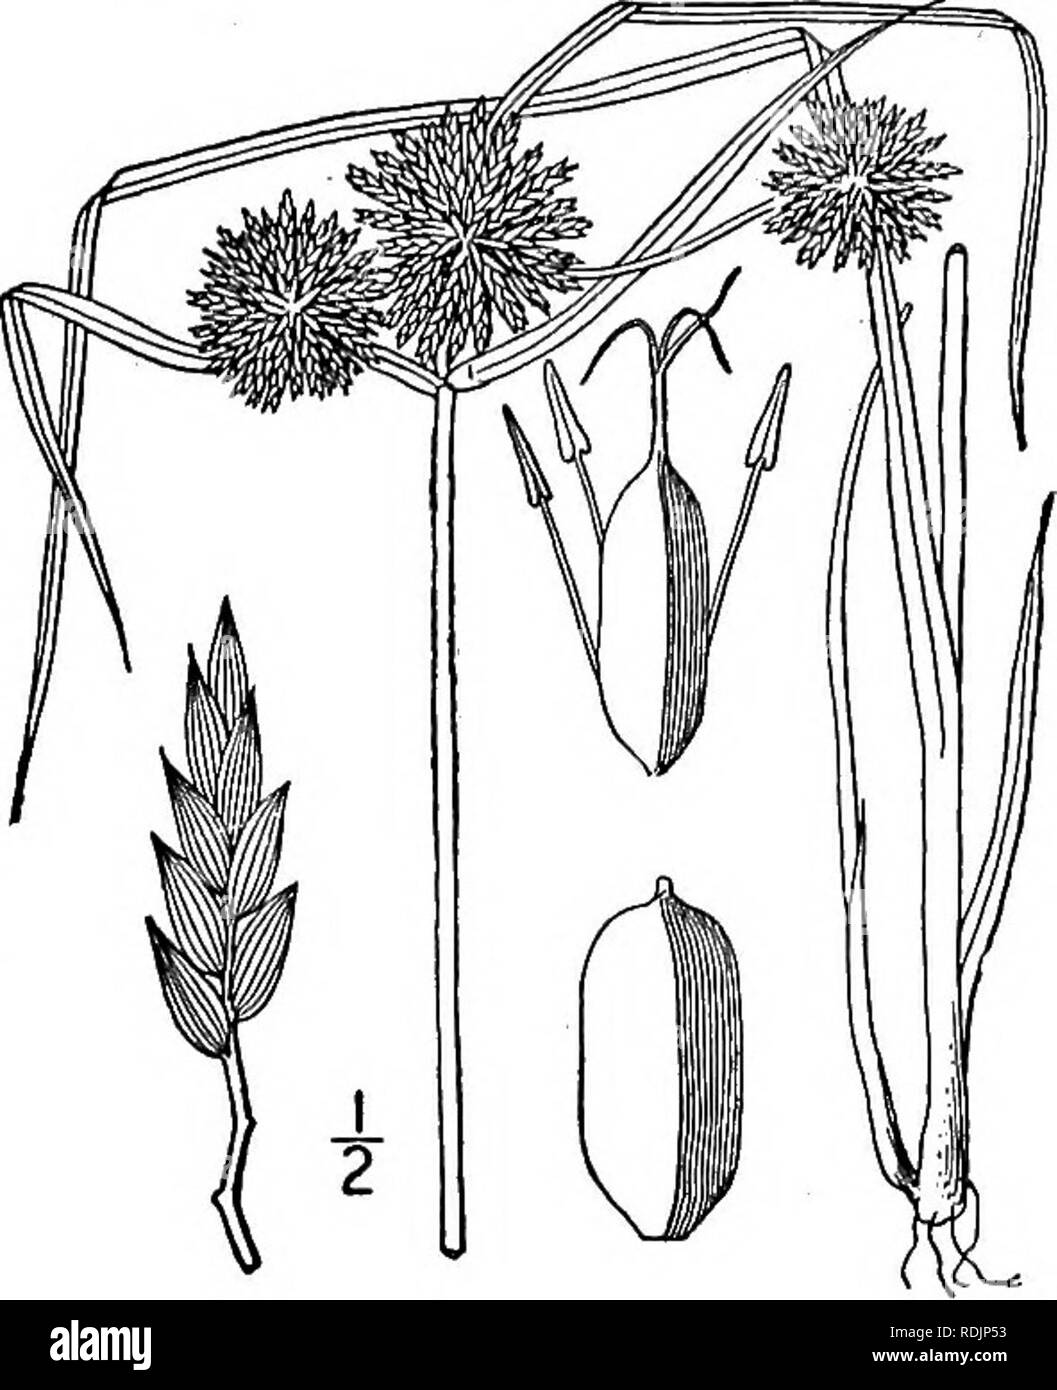 . An illustrated flora of the northern United States, Canada and the British possessions, from Newfoundland to the parallel of the southern boundary of Virginia, and from the Atlantic Ocean westward to the 102d meridian. Botany; Botany. Genus 2. SEDGE FAMILY. 3°9. 34. Cyperus filiculmis Vahl. Slender Cyperus. Fig. 754. Cyperus filiculmis Vahl, Enum. 2 : 328. 1806. C. filiculmis macilentus Fernald, Rhodora 8: 128. 1906. C. macilentus Bicknell, Bull. Torr. Club 35: 478. 1908. Perennial by hard oblong corms, culm smooth, slen- der or almost filiform, ascending or reclined, 6'-i8' long, usually lo Stock Photo